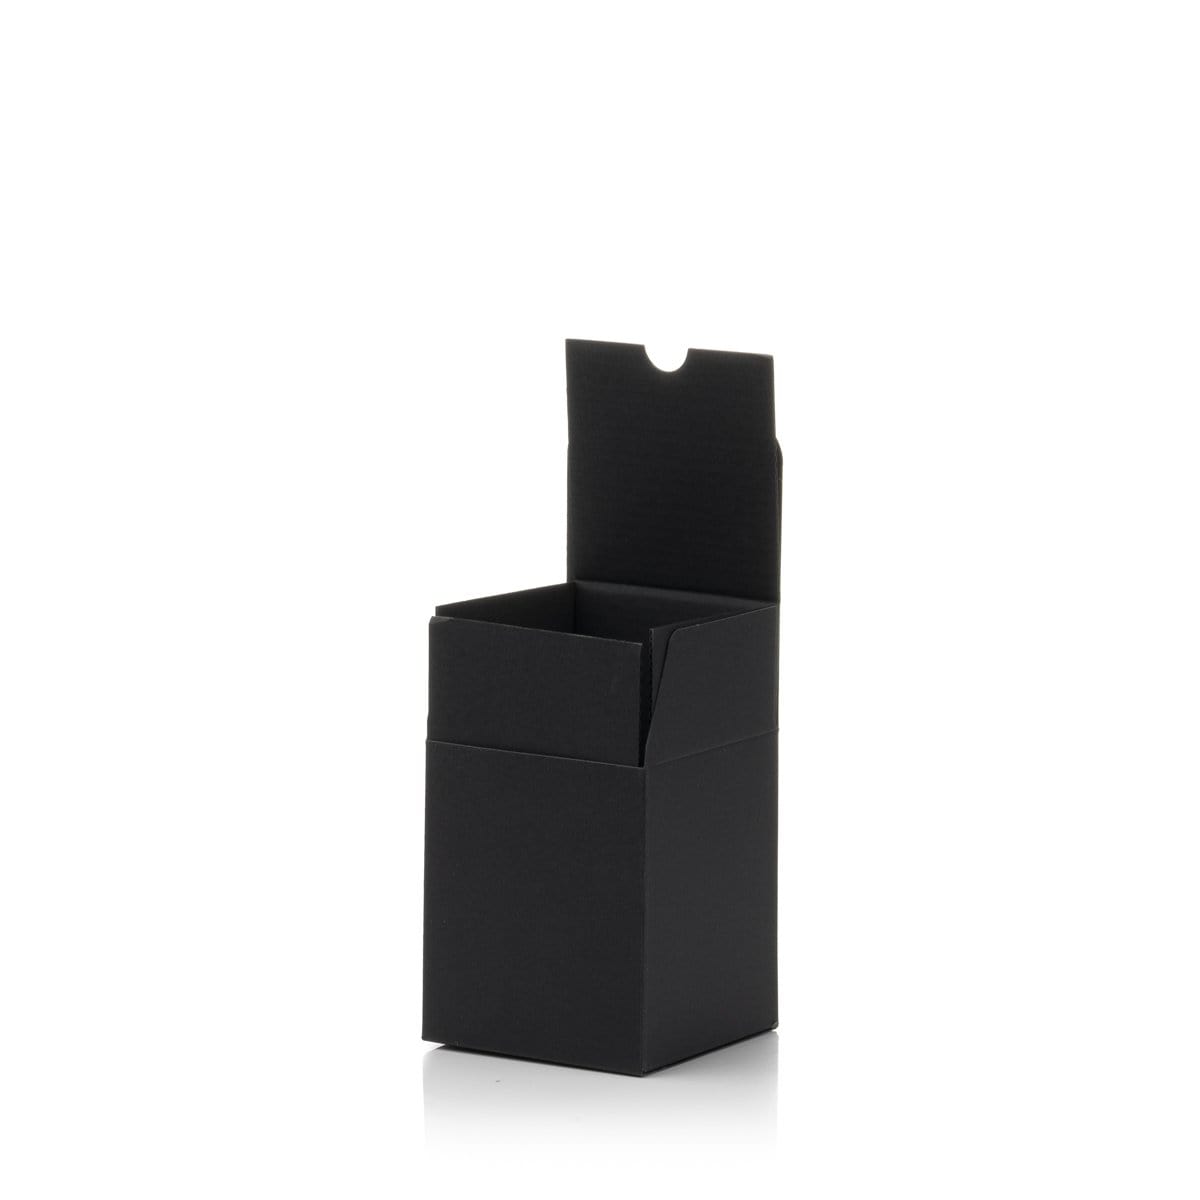 Candle Shack Candle Box Luxury Folding Box & Liner for 20cl - Black